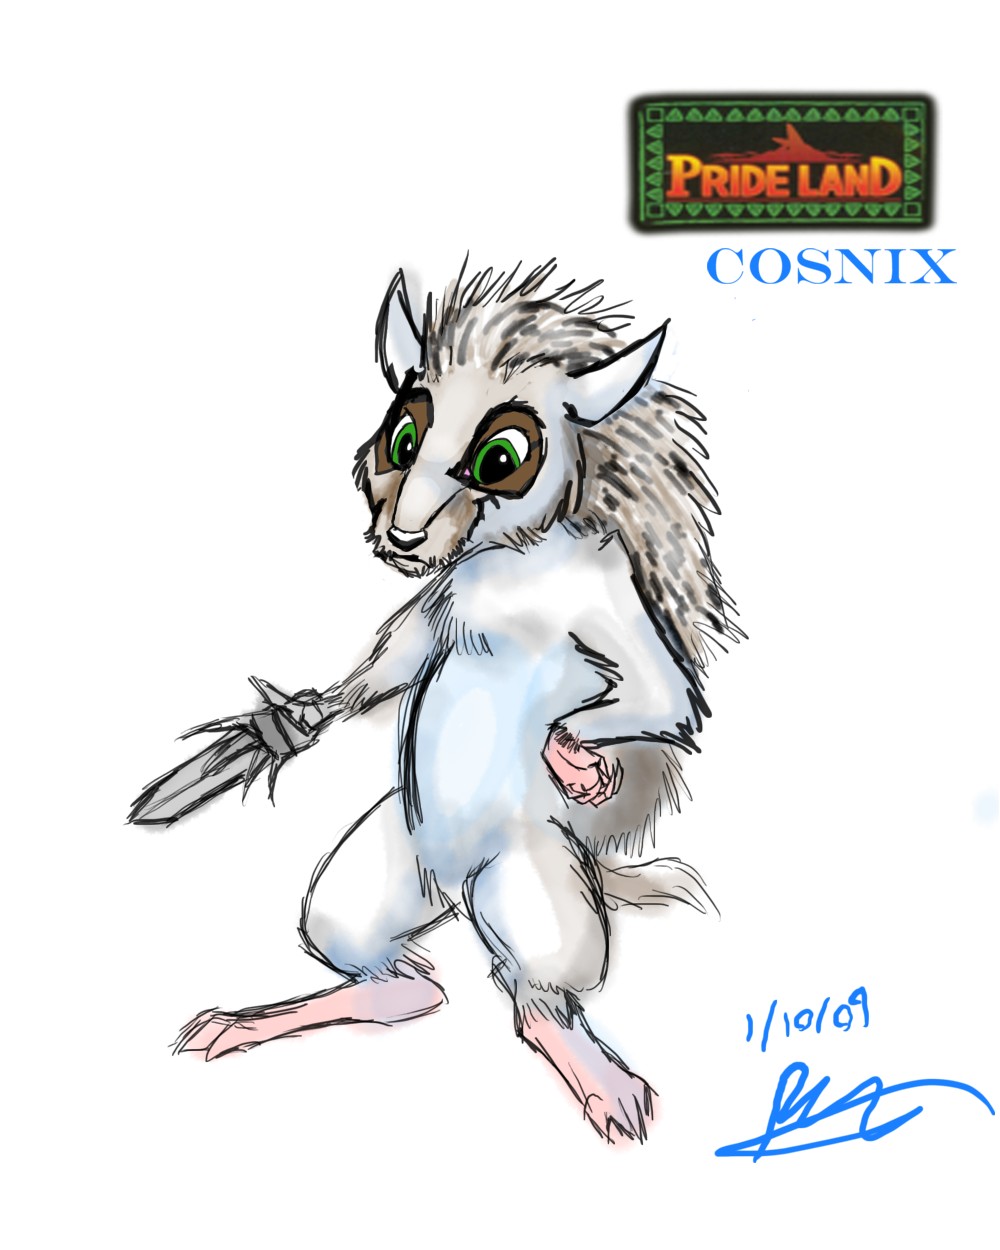 Cosnix in the Pride Lands by TheGameArtCritic